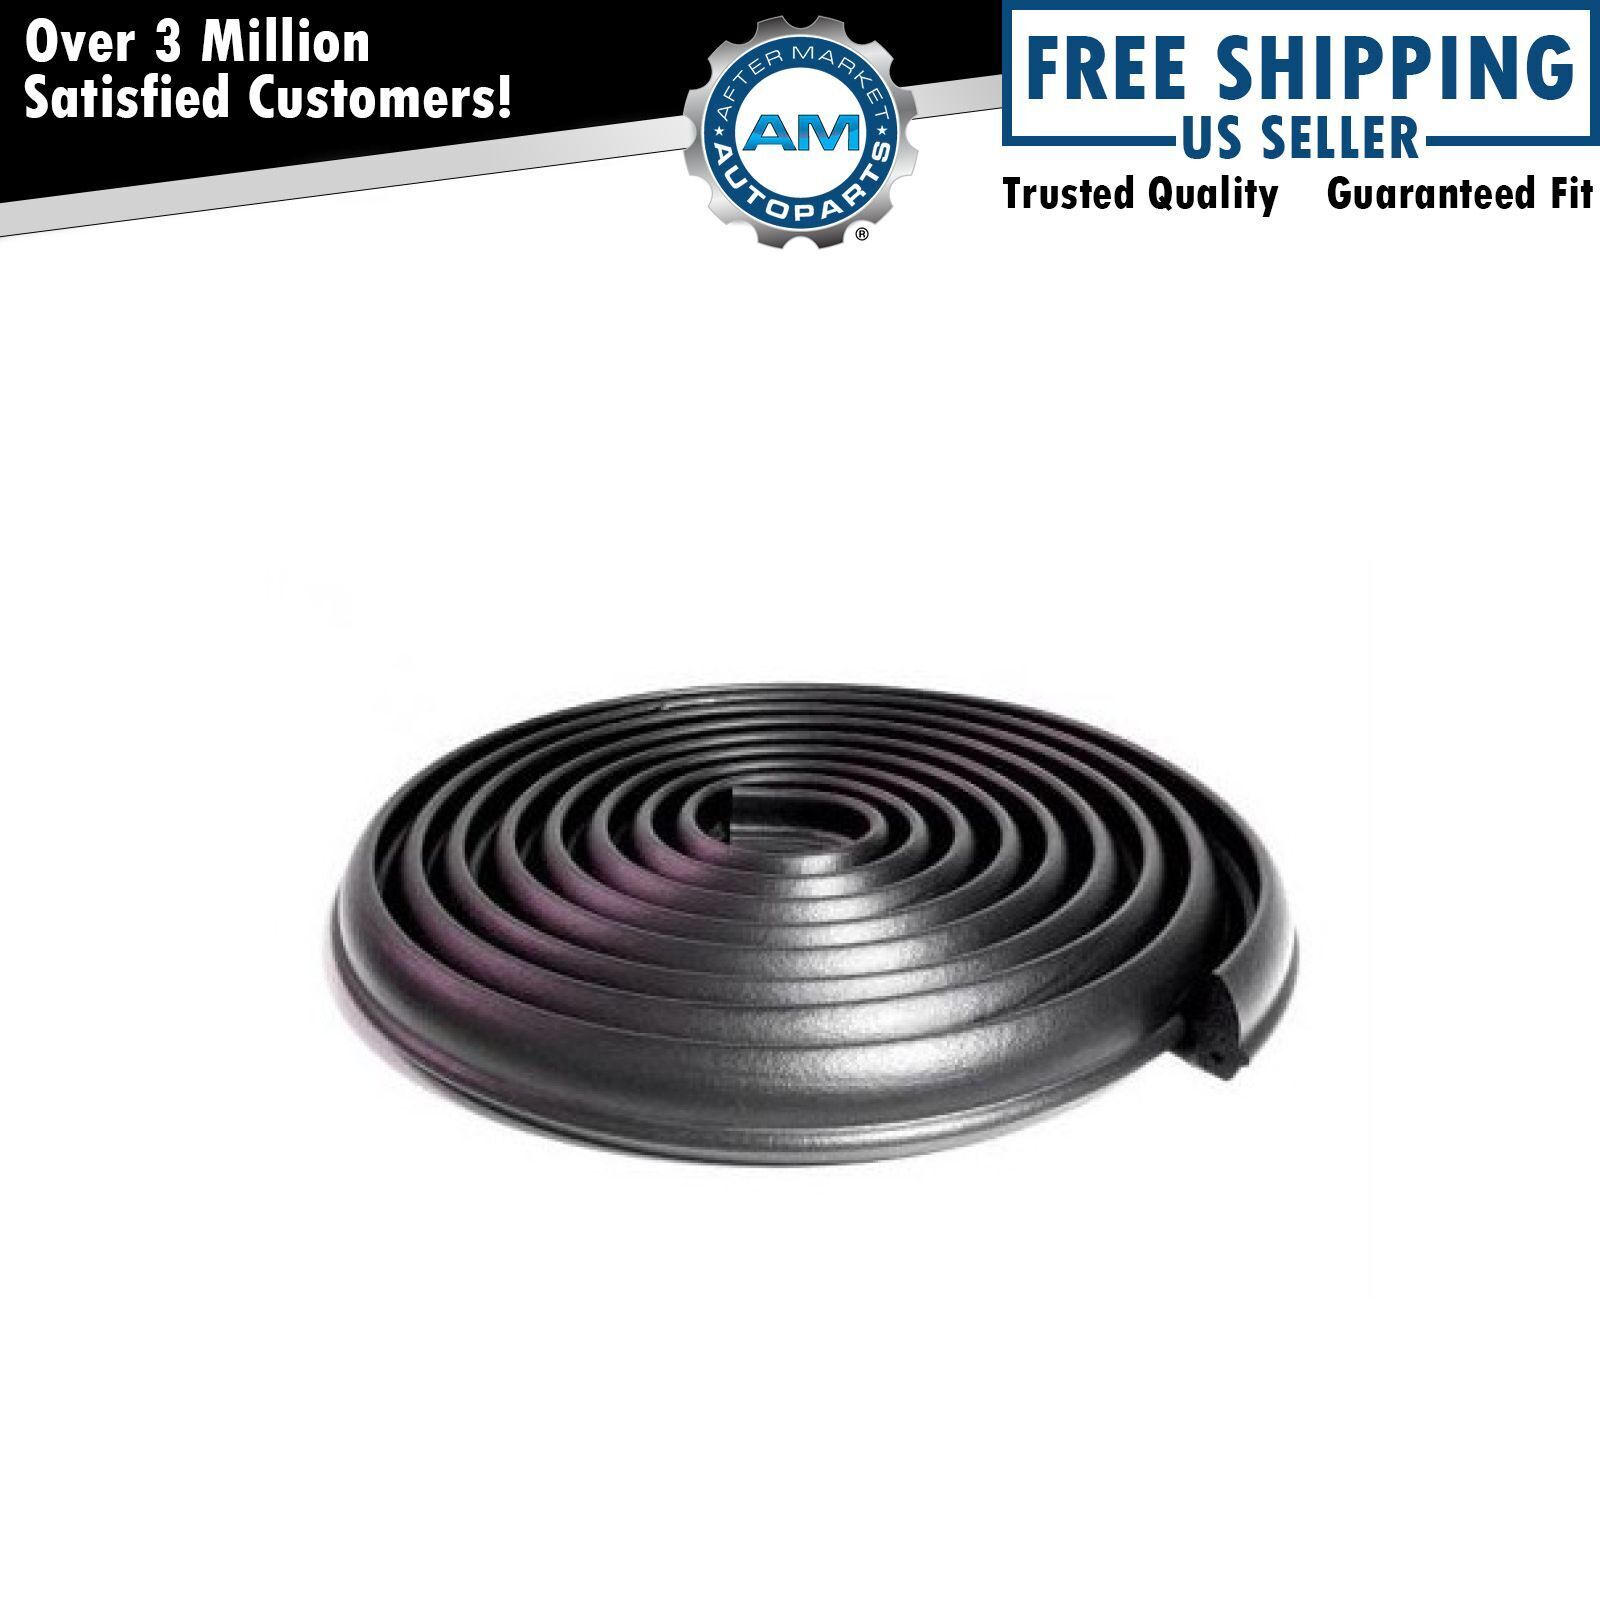 Trunk Weatherstrip Seal Rubber TK 46-E/18 for 71-76 Buick Chevy Cadillac Pontiac